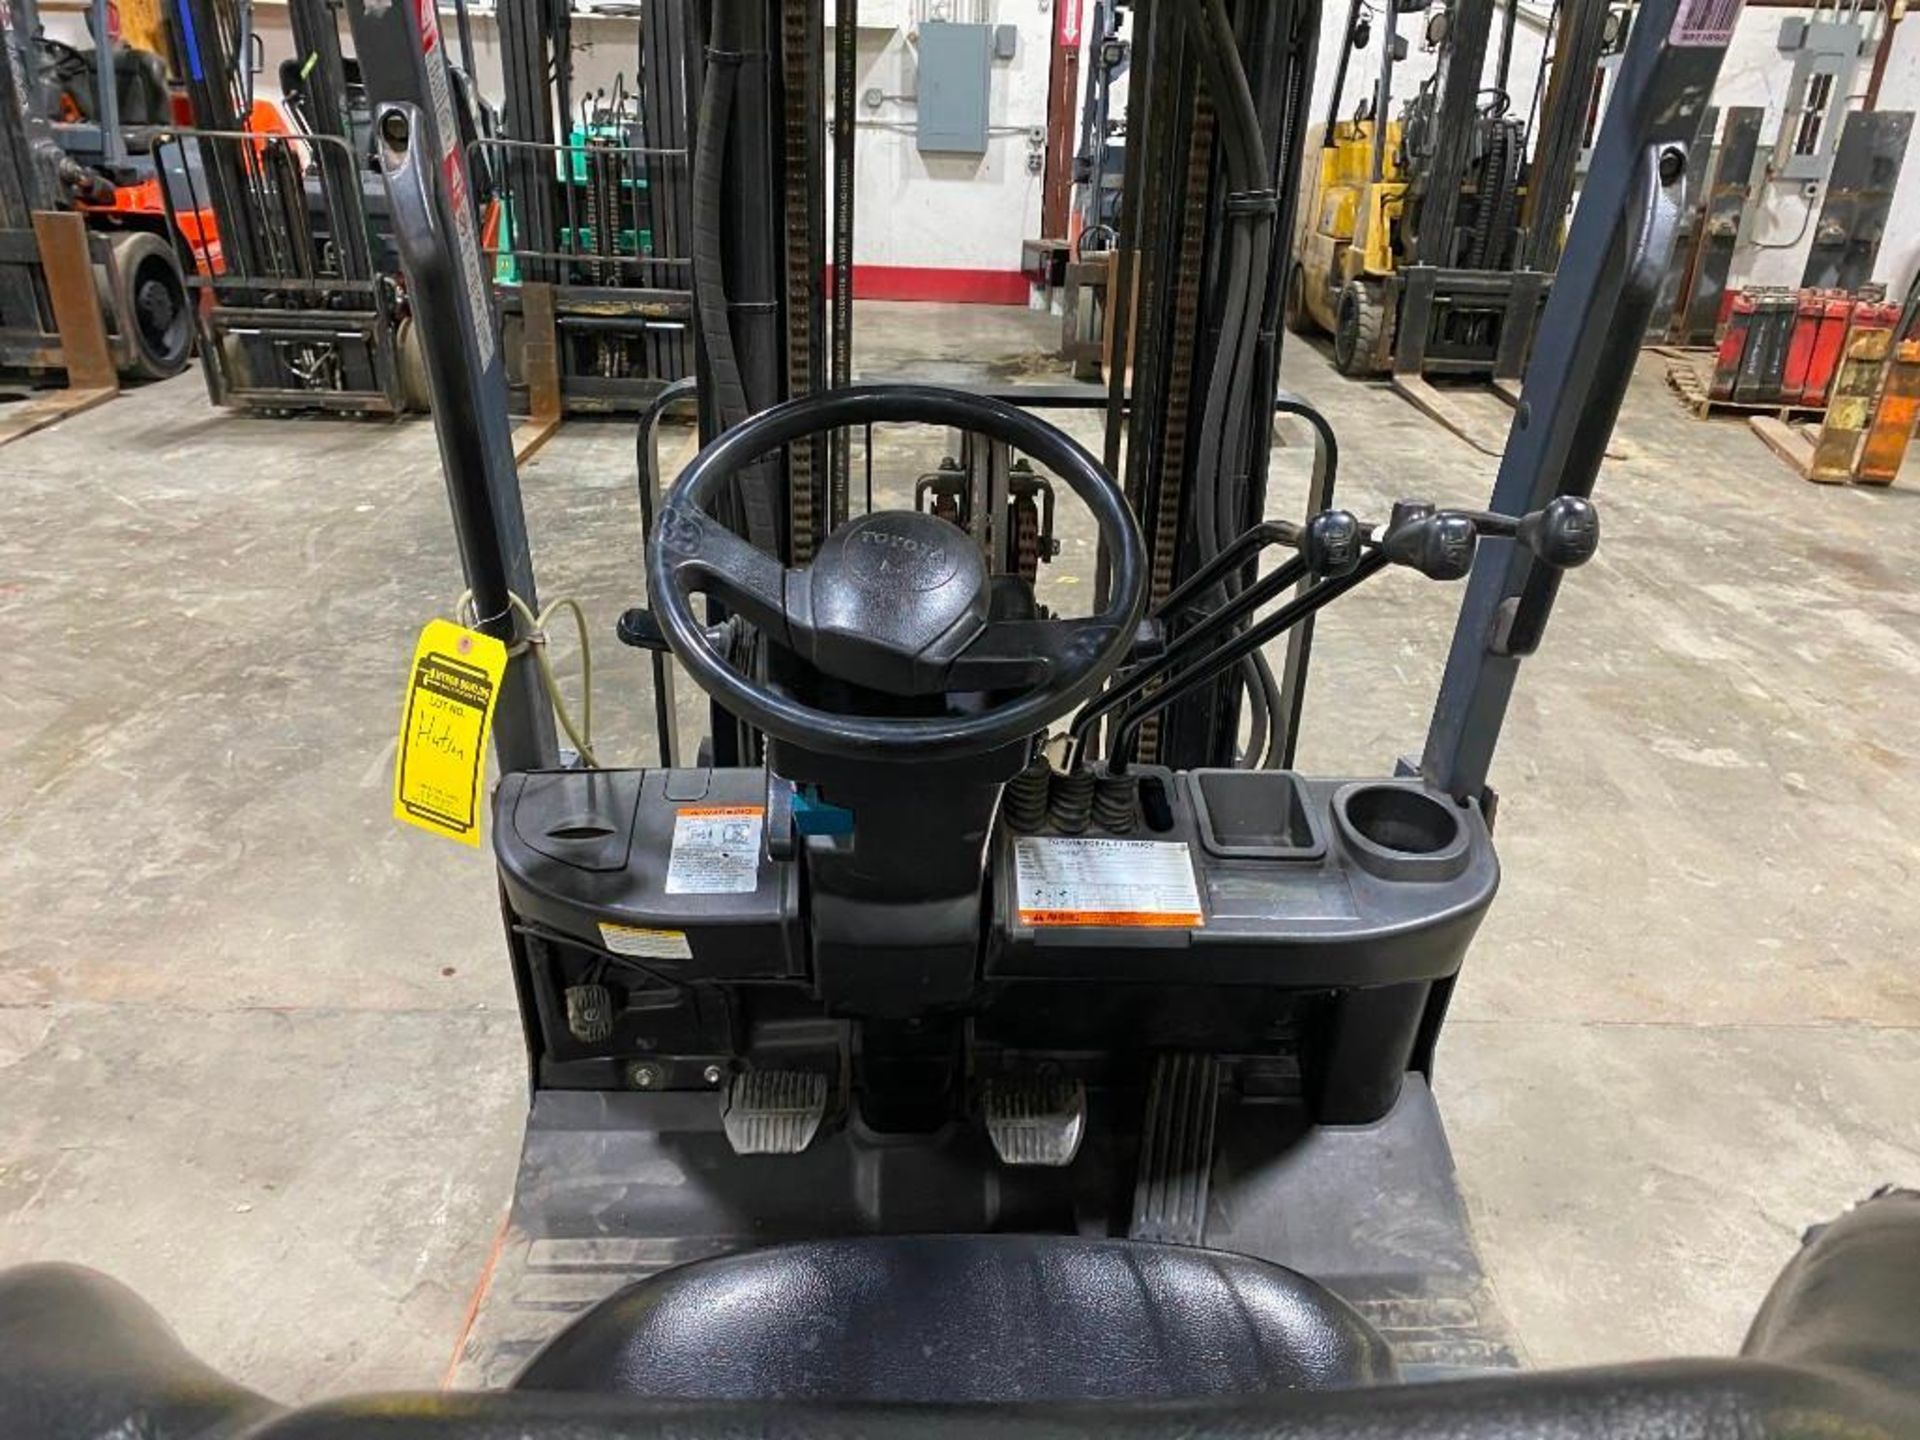 2016 Toyota 3,000-LB. Capacity Forklift, Model 8FGCU15, S/N 35454, LPG, Non-Marking Cushion Tires, 3 - Image 5 of 5